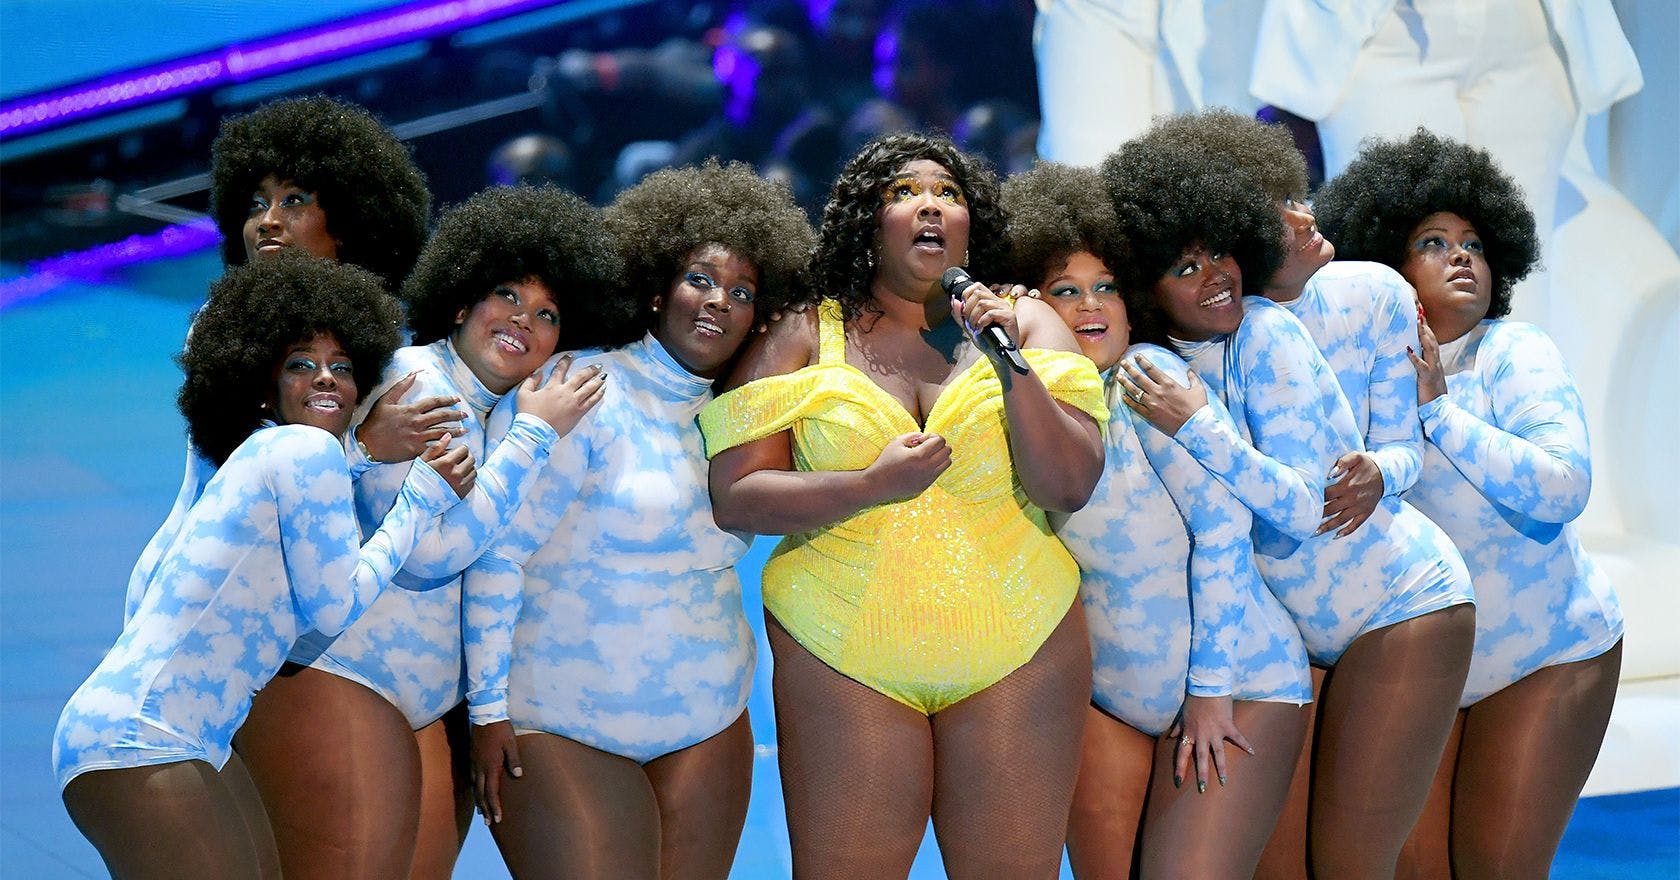 VMAs 2019: Lizzo’s Good As Hell performance was about self ... - 1680 x 880 jpeg 219kB